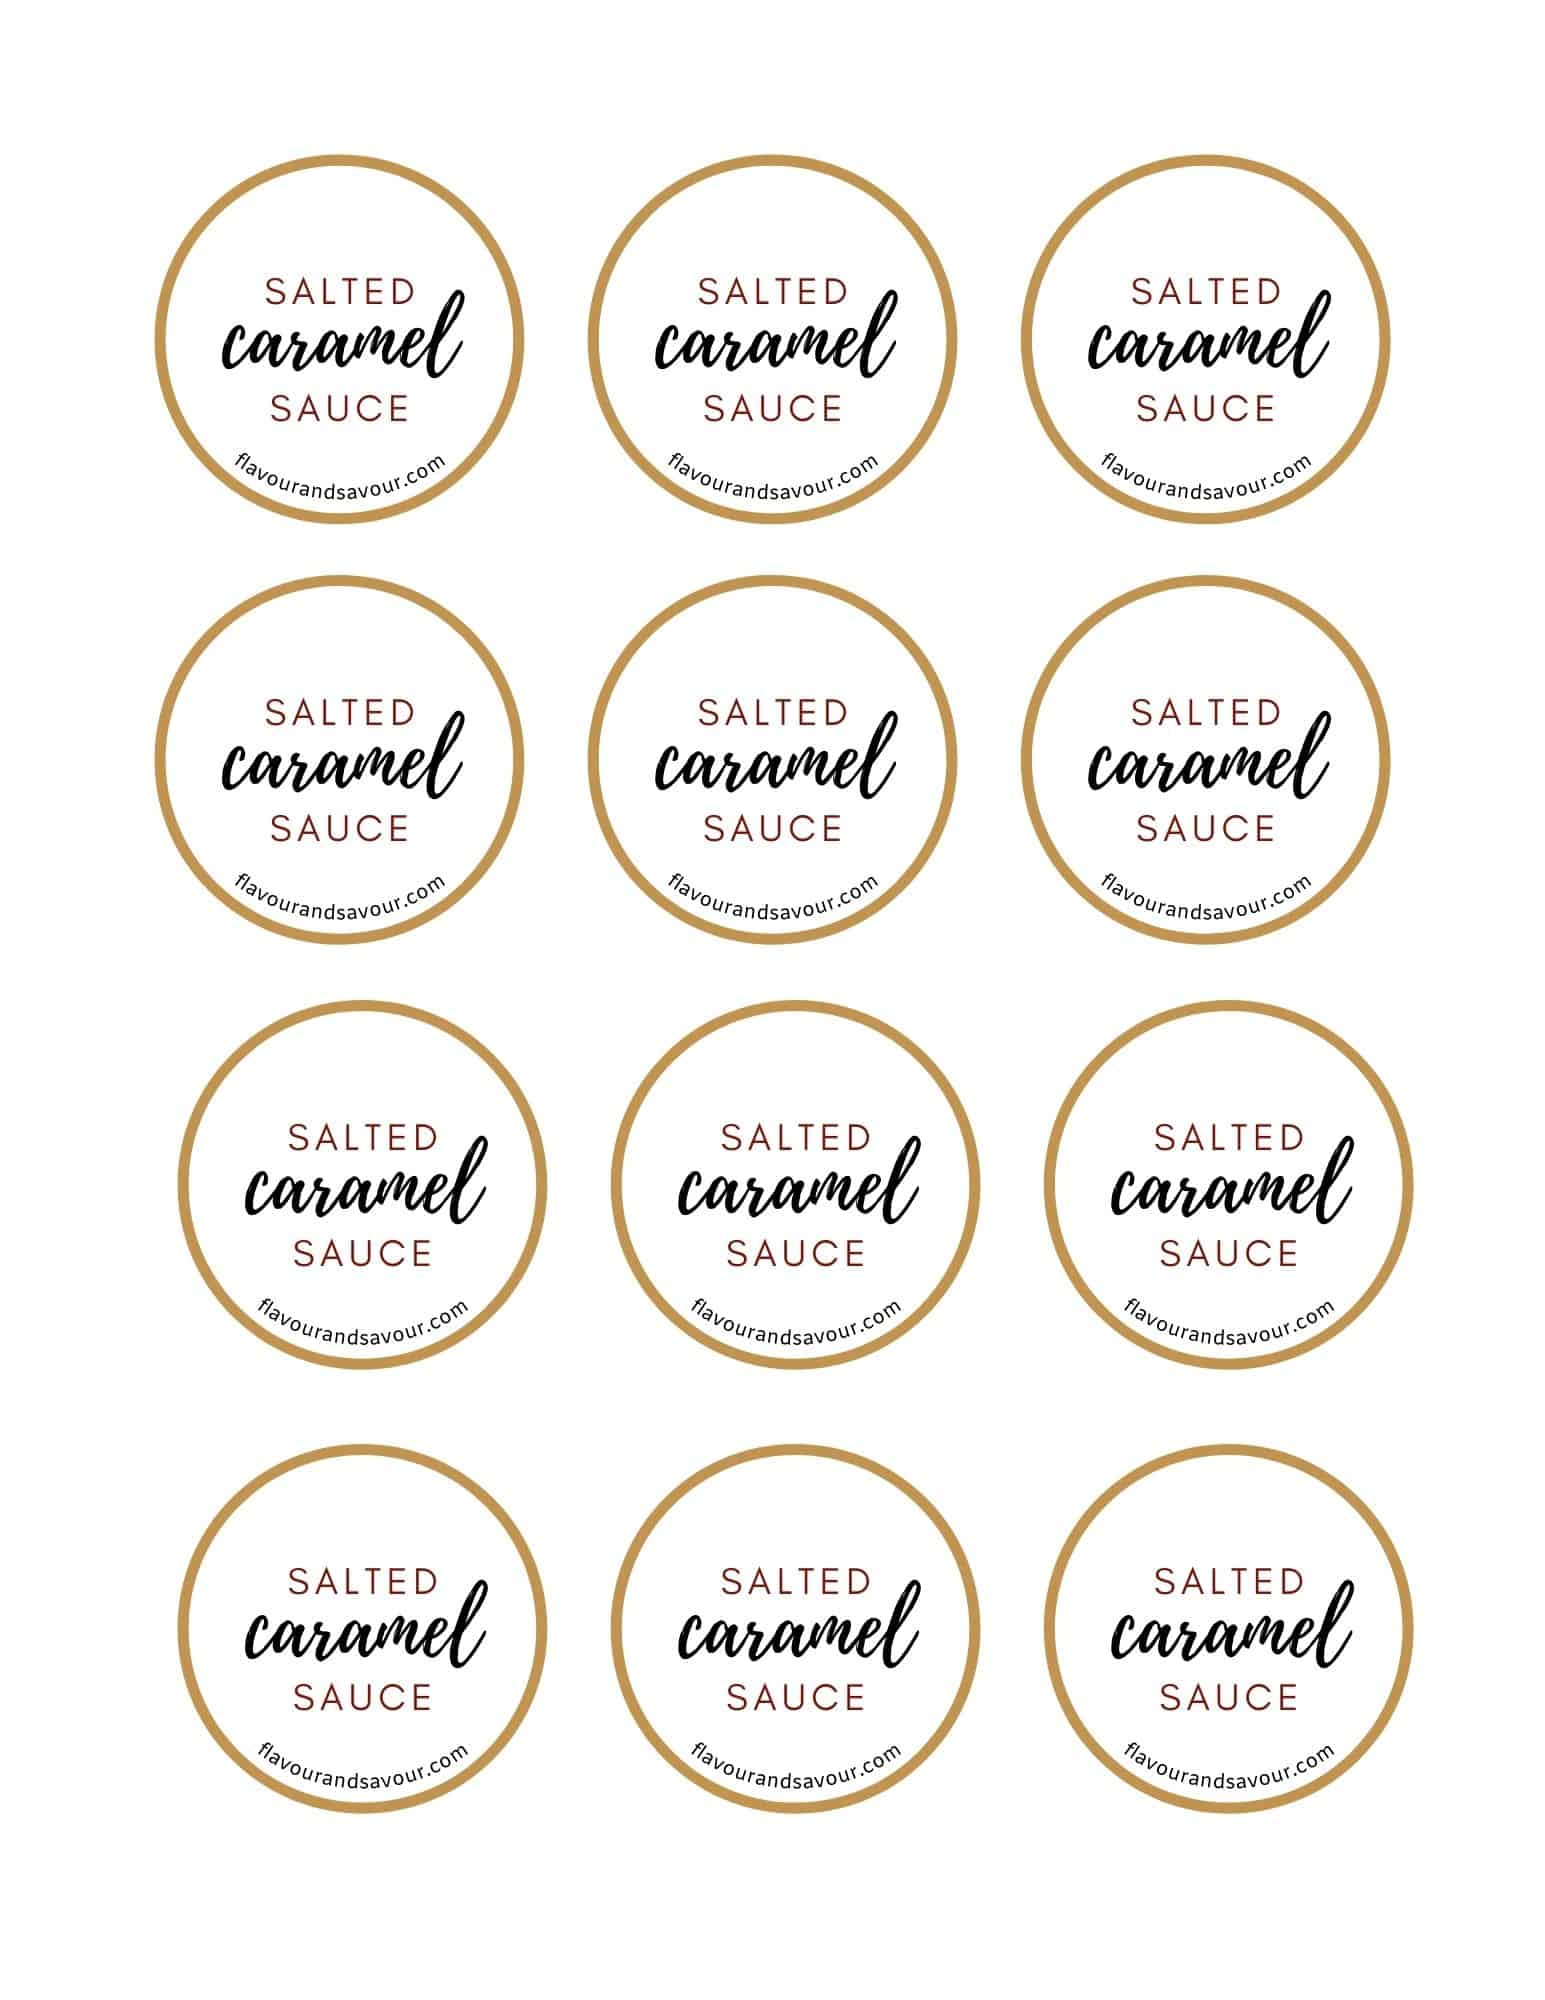 Printable labels for salted caramel sauce.